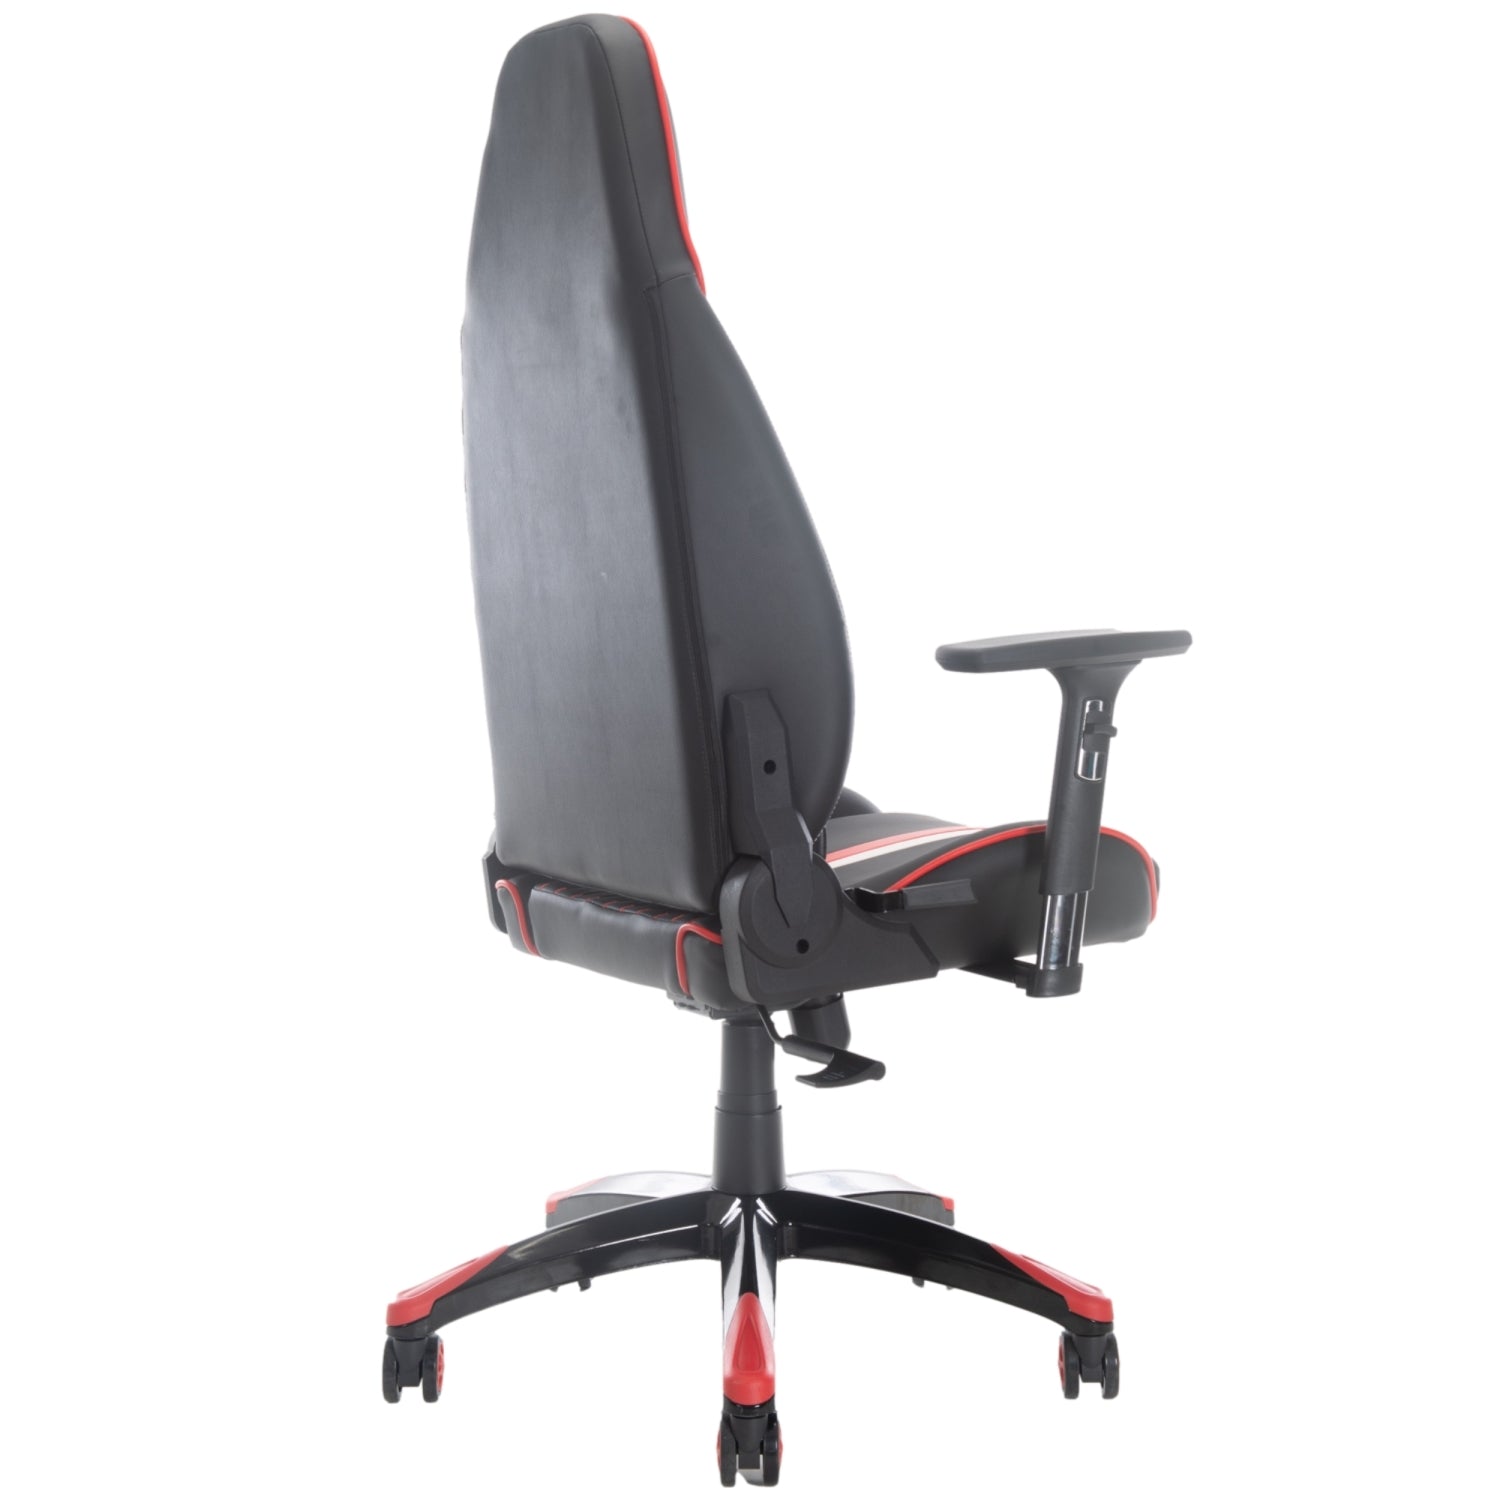 ViscoLogic Cayenne X Ergonomic Height Adjustable Reclining Sports Styled Home Office Racing Gaming Chair for PC Video Game Computer (Black-Red-White)